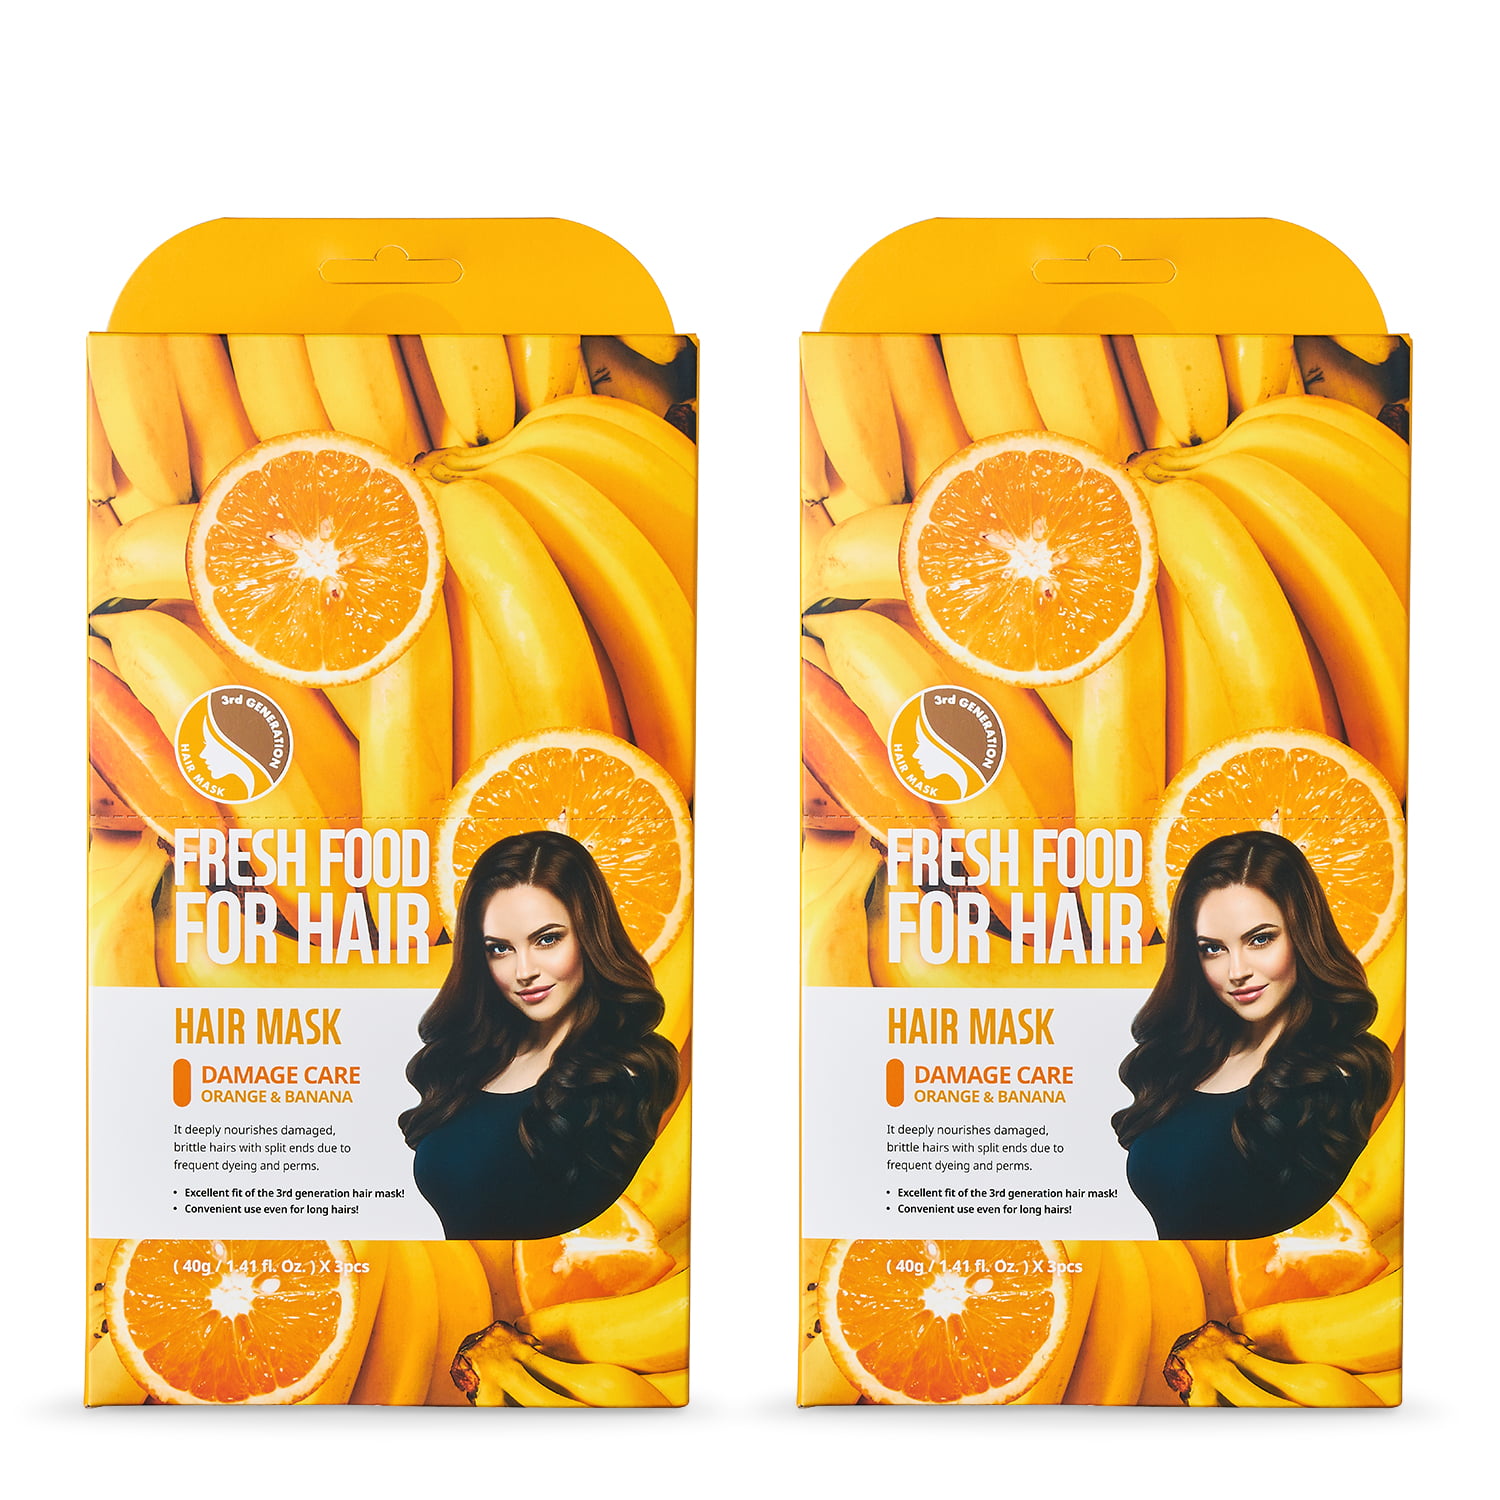 FARMSKIN Freshfood for Hair Care Hair Mask Cap Salon Quality Easy Hair Care  at Home without a mess Damage Care Set of 2 (Pack of 6),  Fl Oz -  